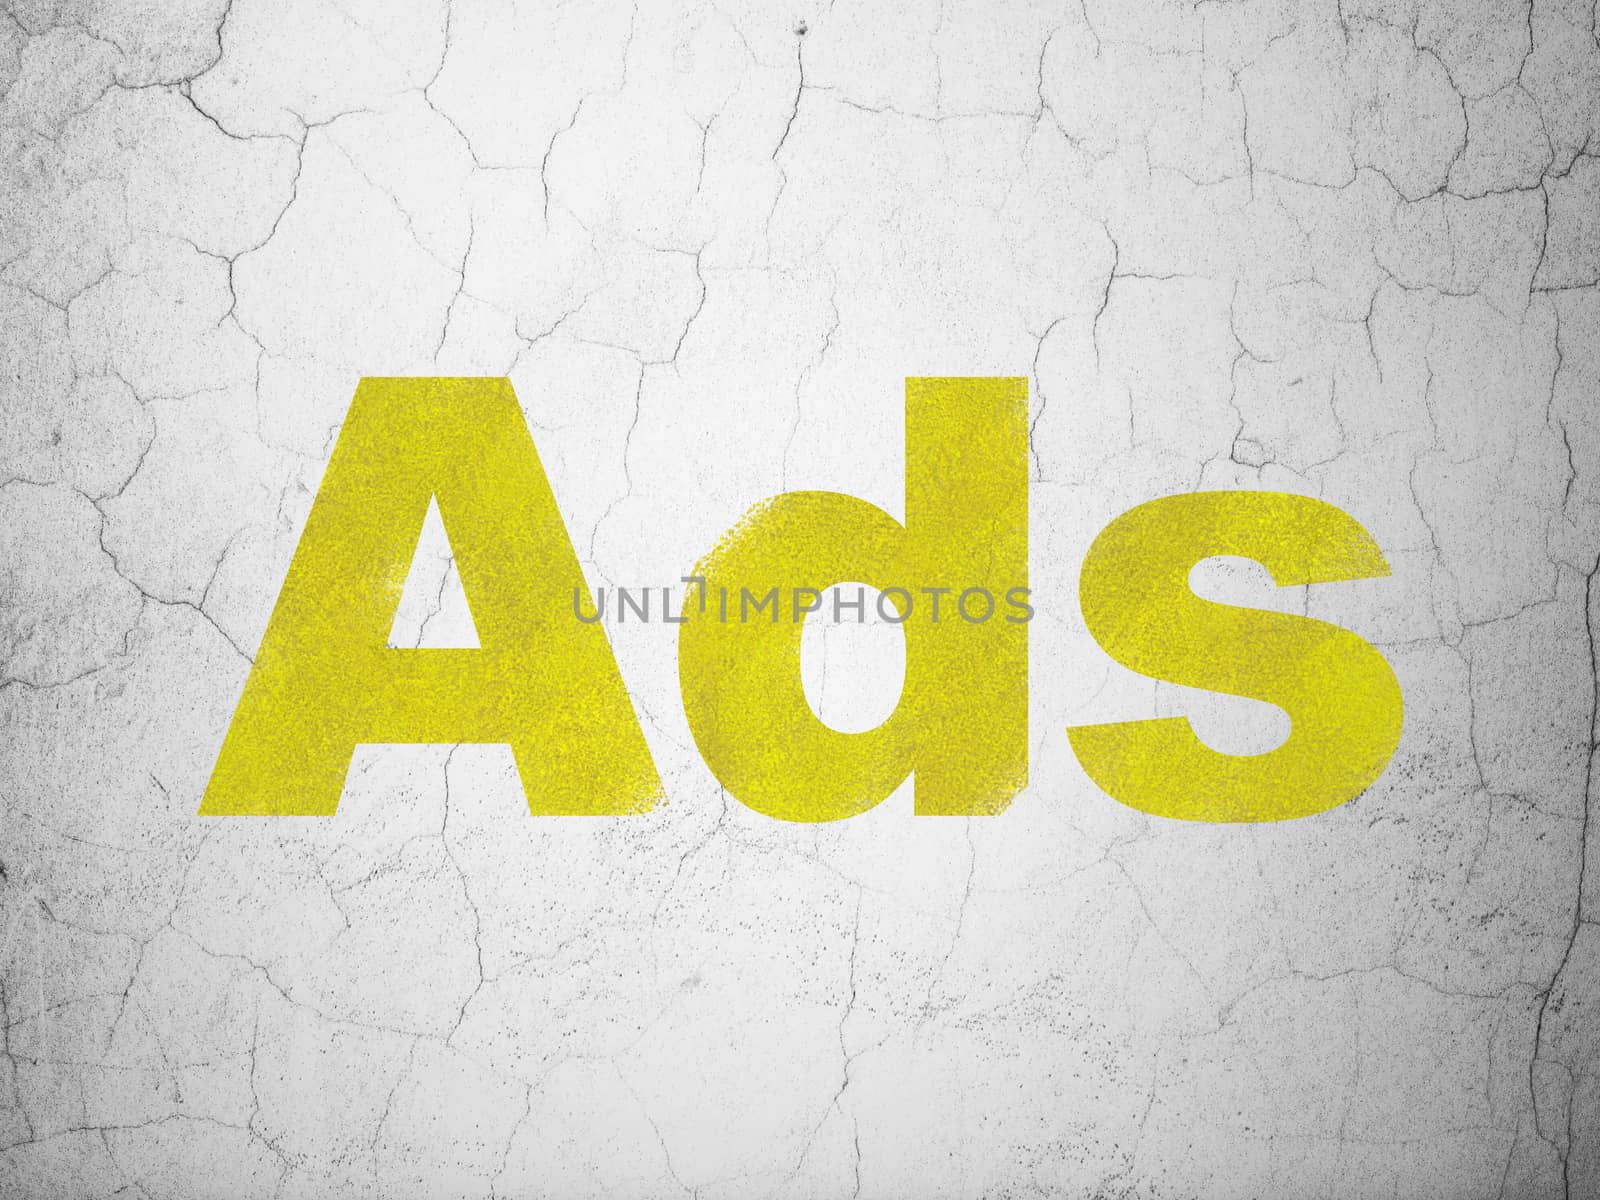 Advertising concept: Yellow Ads on textured concrete wall background